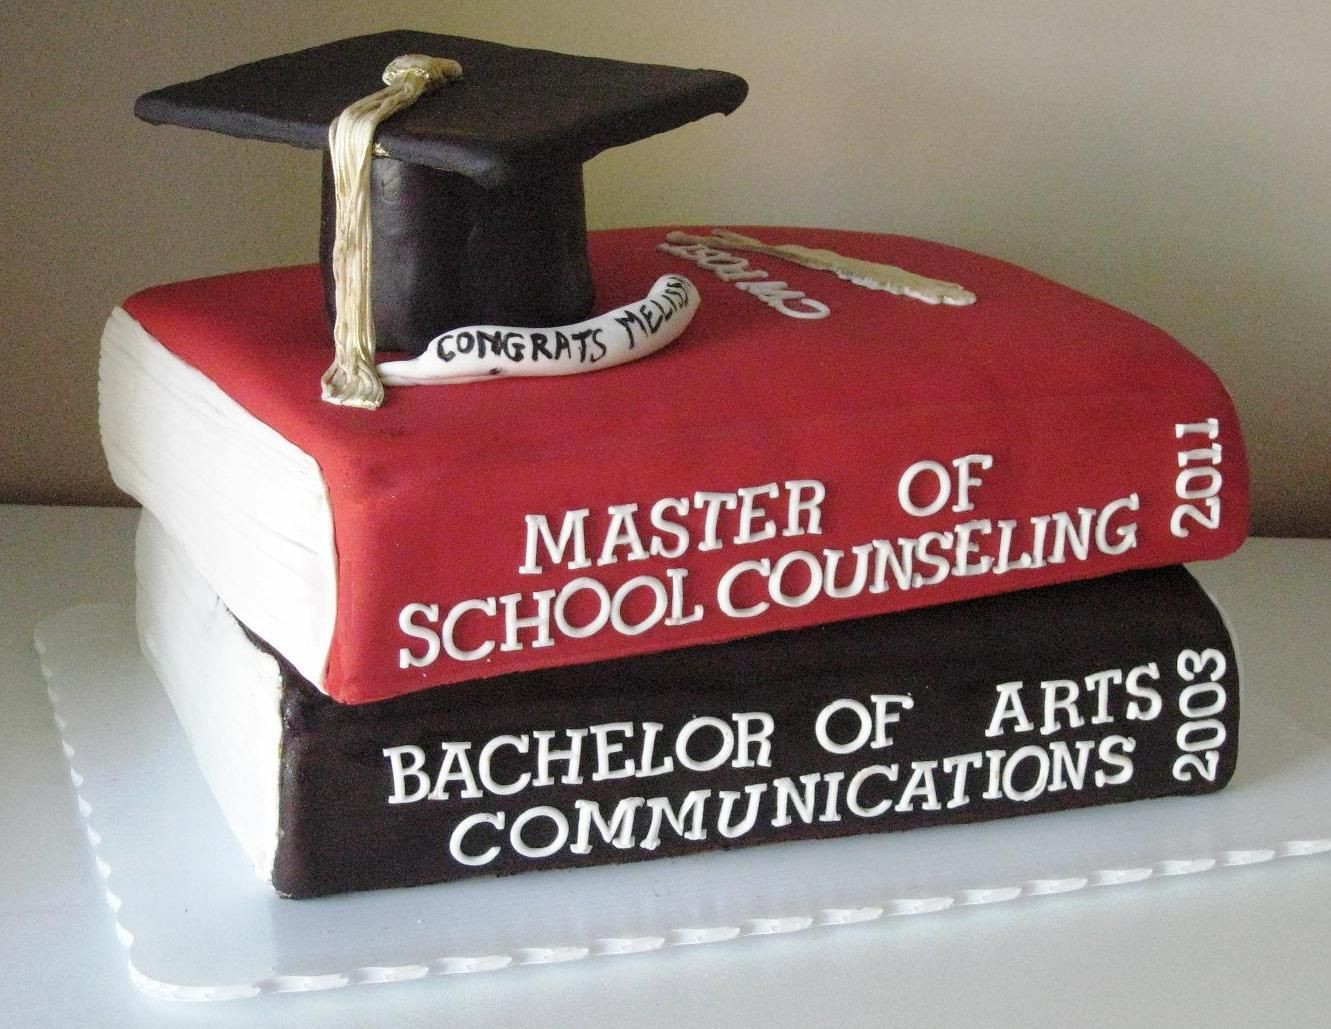 Bachelor Degree Graduation Gift Ideas
 Can someone make me one of these when I graduate